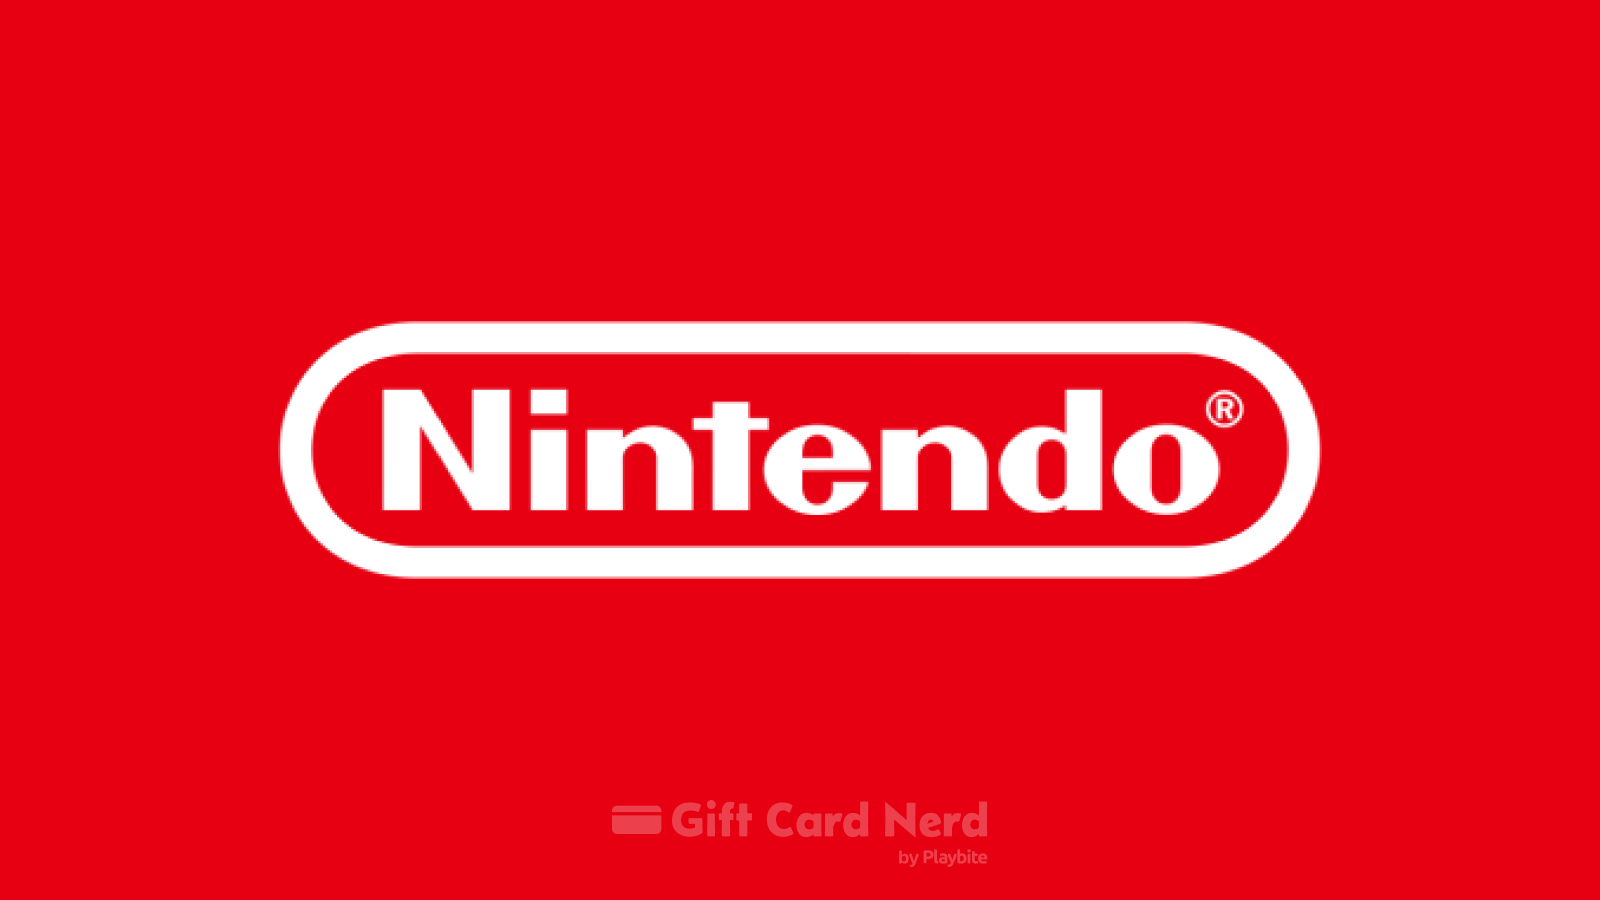 Can I Use a Nintendo Gift Card on PayPal?